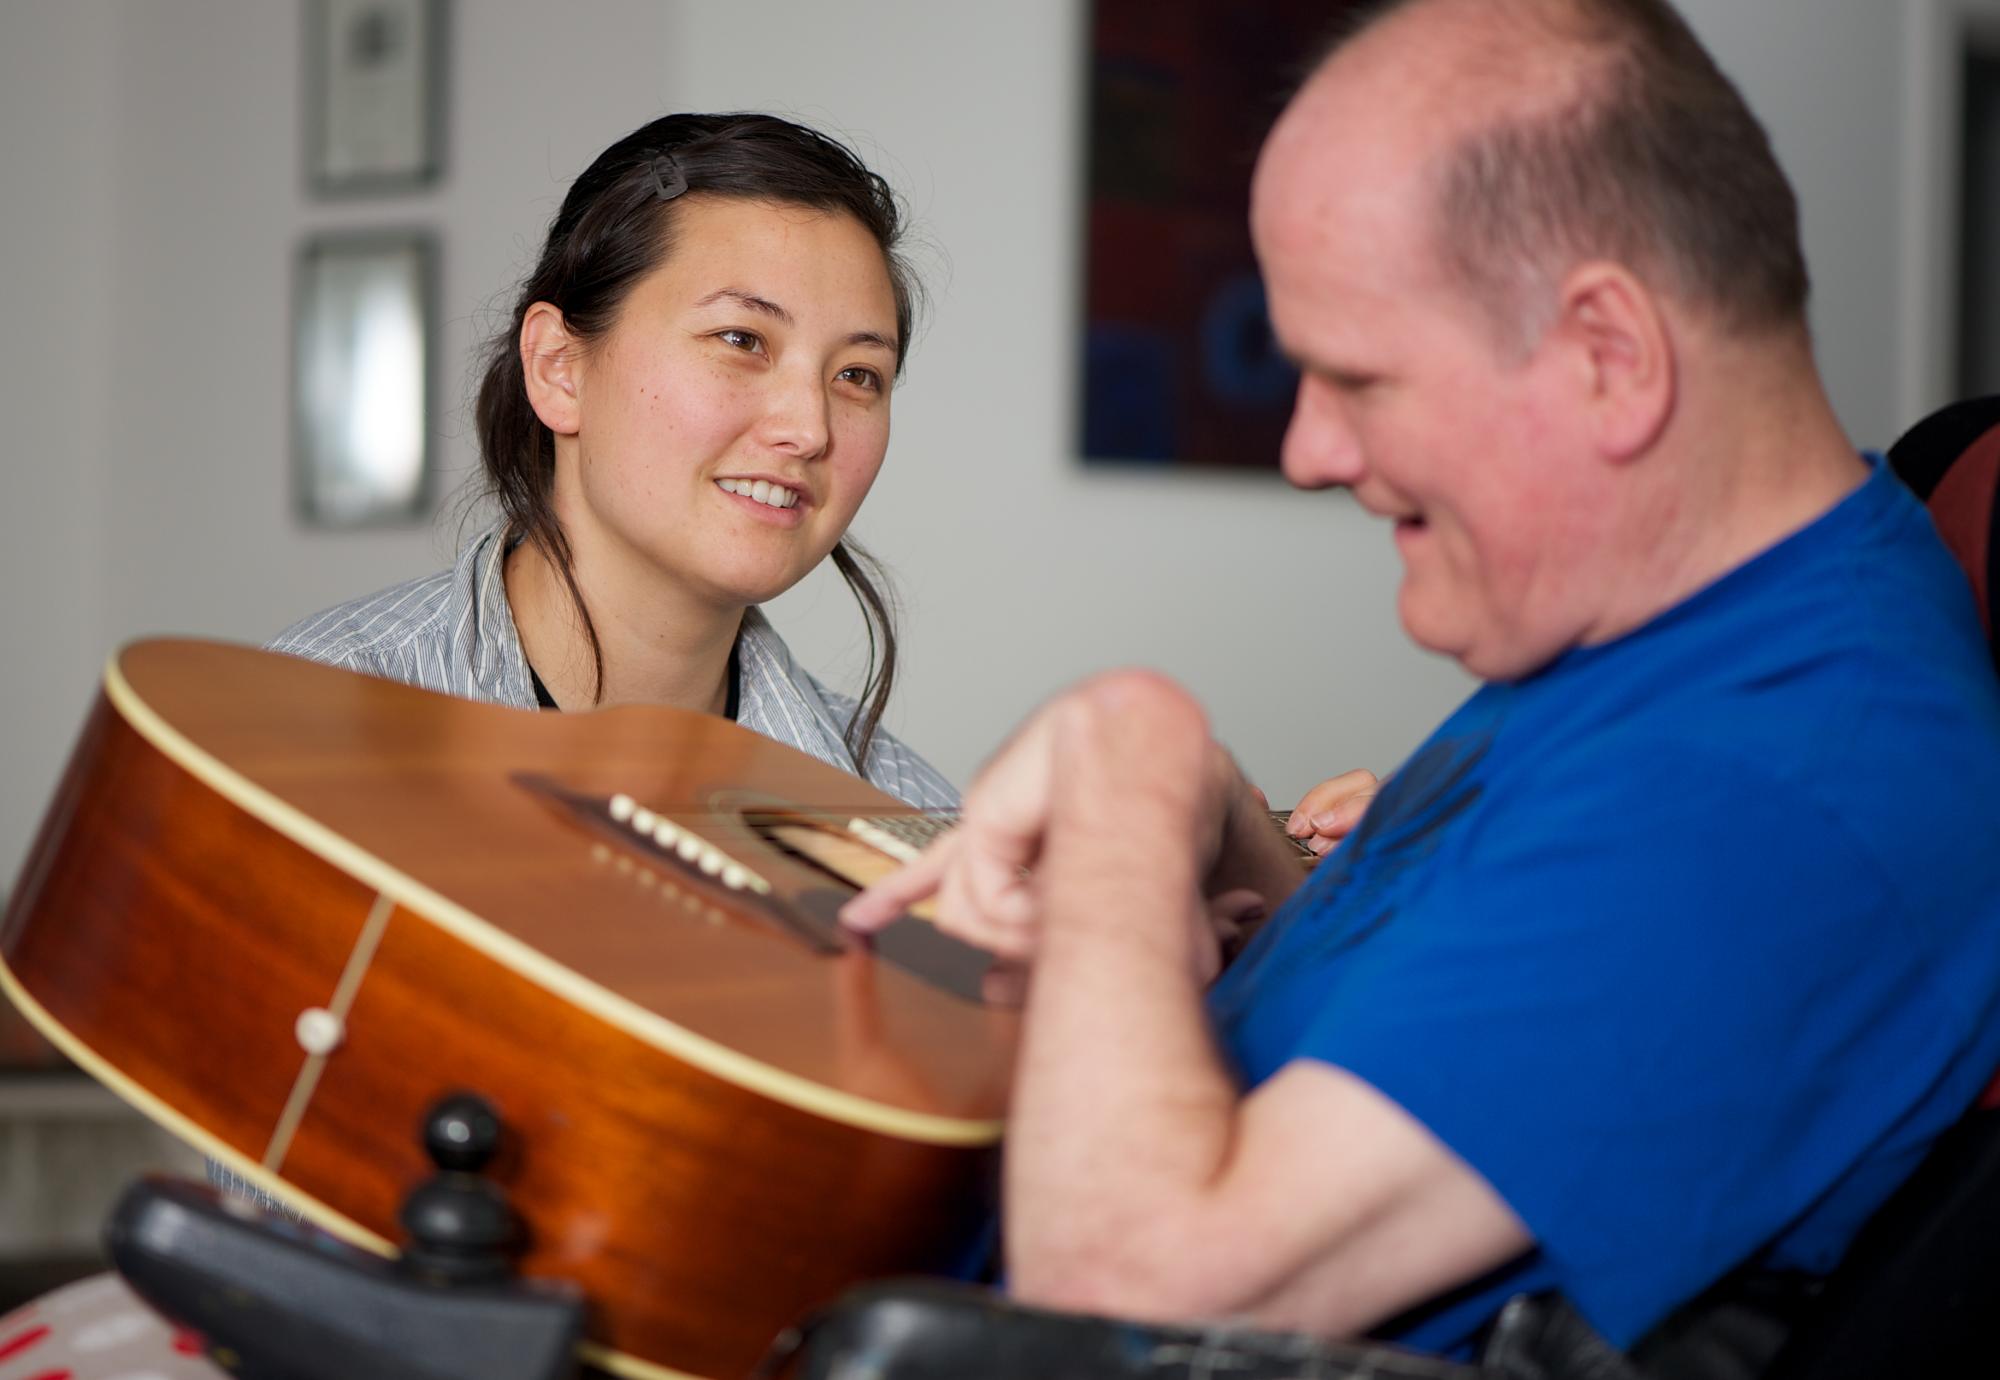 Social care worker sitting with a disabled man as he plays guitar